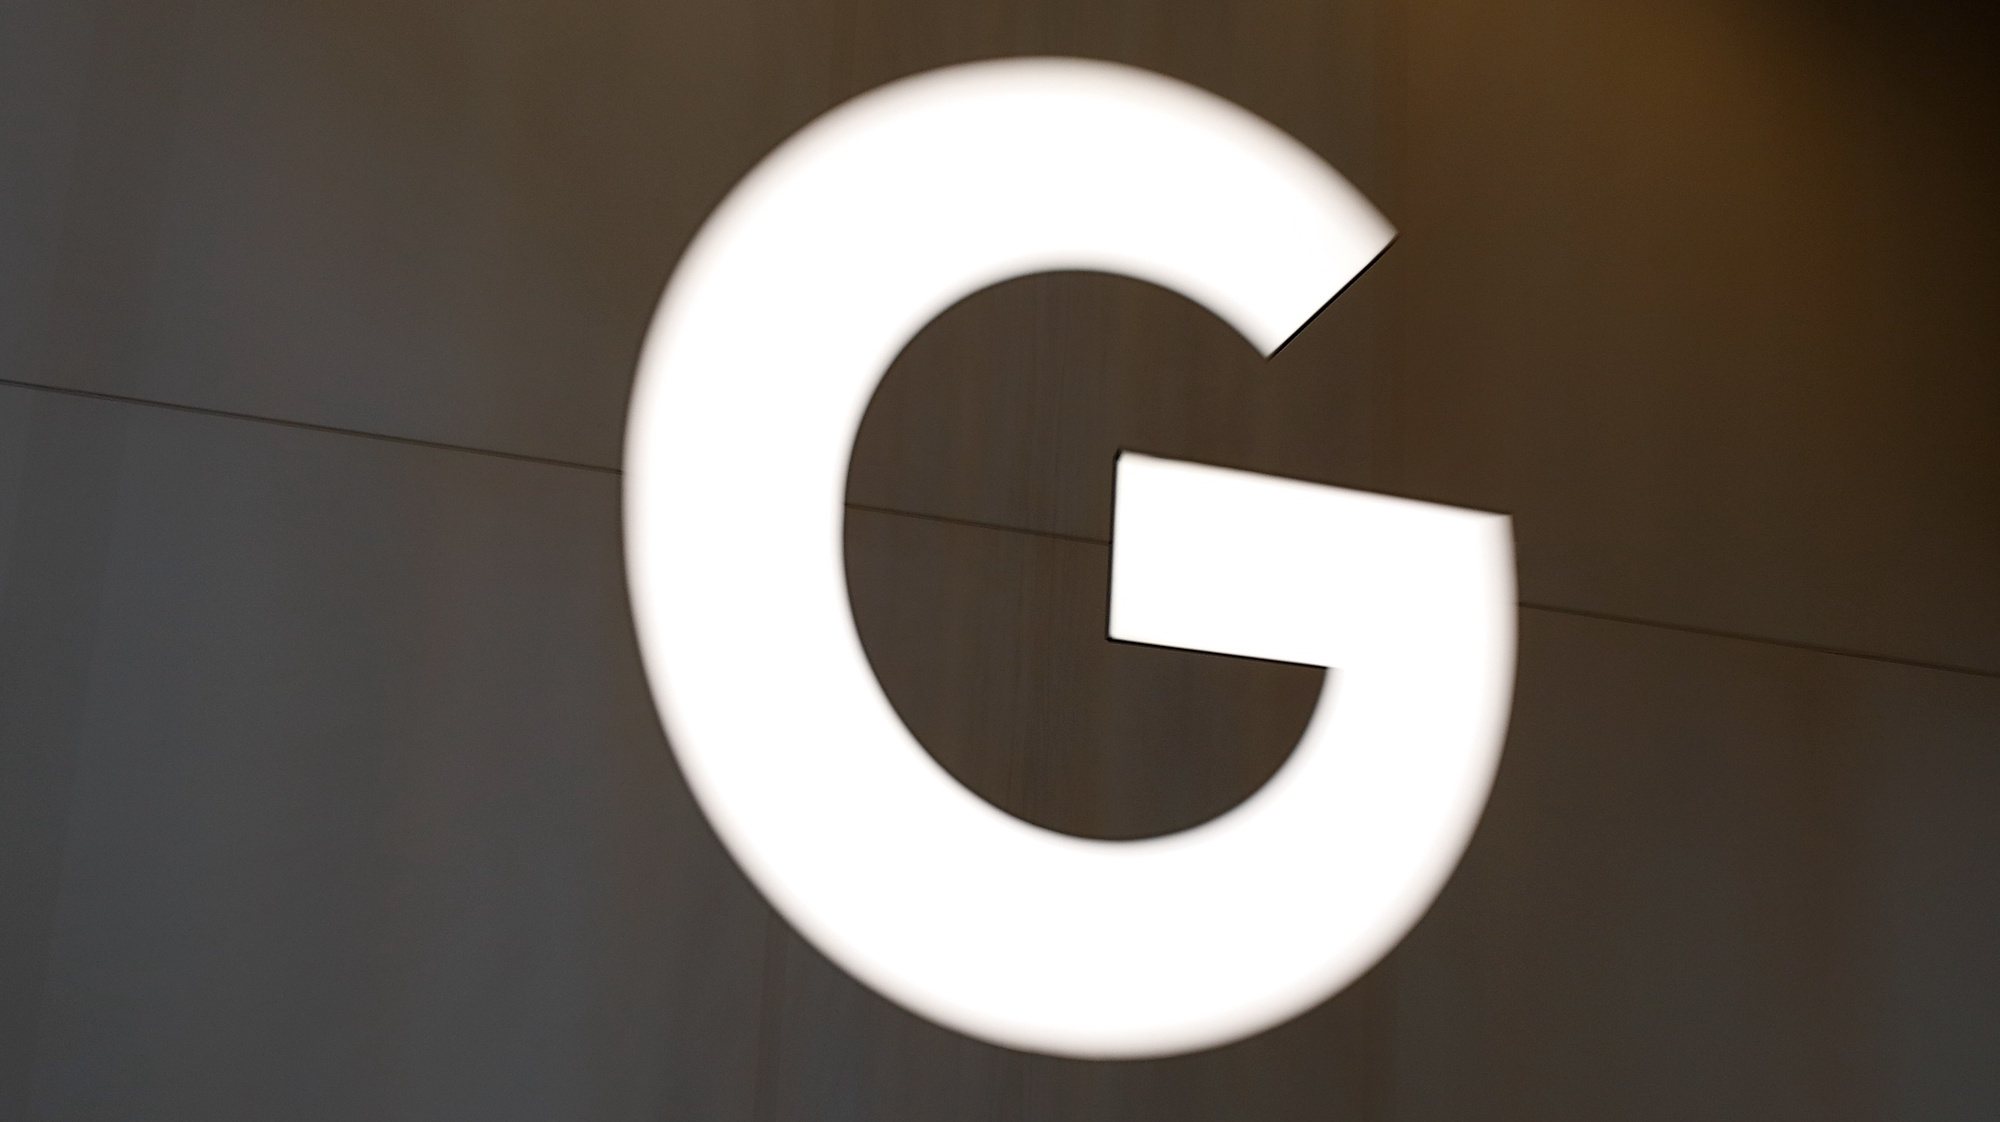 epa09281593 A view of the Google &#039;G&#039; sign inside the Google retail store in the Chelsea neighborhood of New York, New York, USA, 17 June 2021. The Google Store, which opened today, will allow customers to browse through and buy an extensive selection of products made by Google, ranging from Pixel phones, Nest products, Fitbit devices and Pixelbooks.  EPA/JASON SZENES